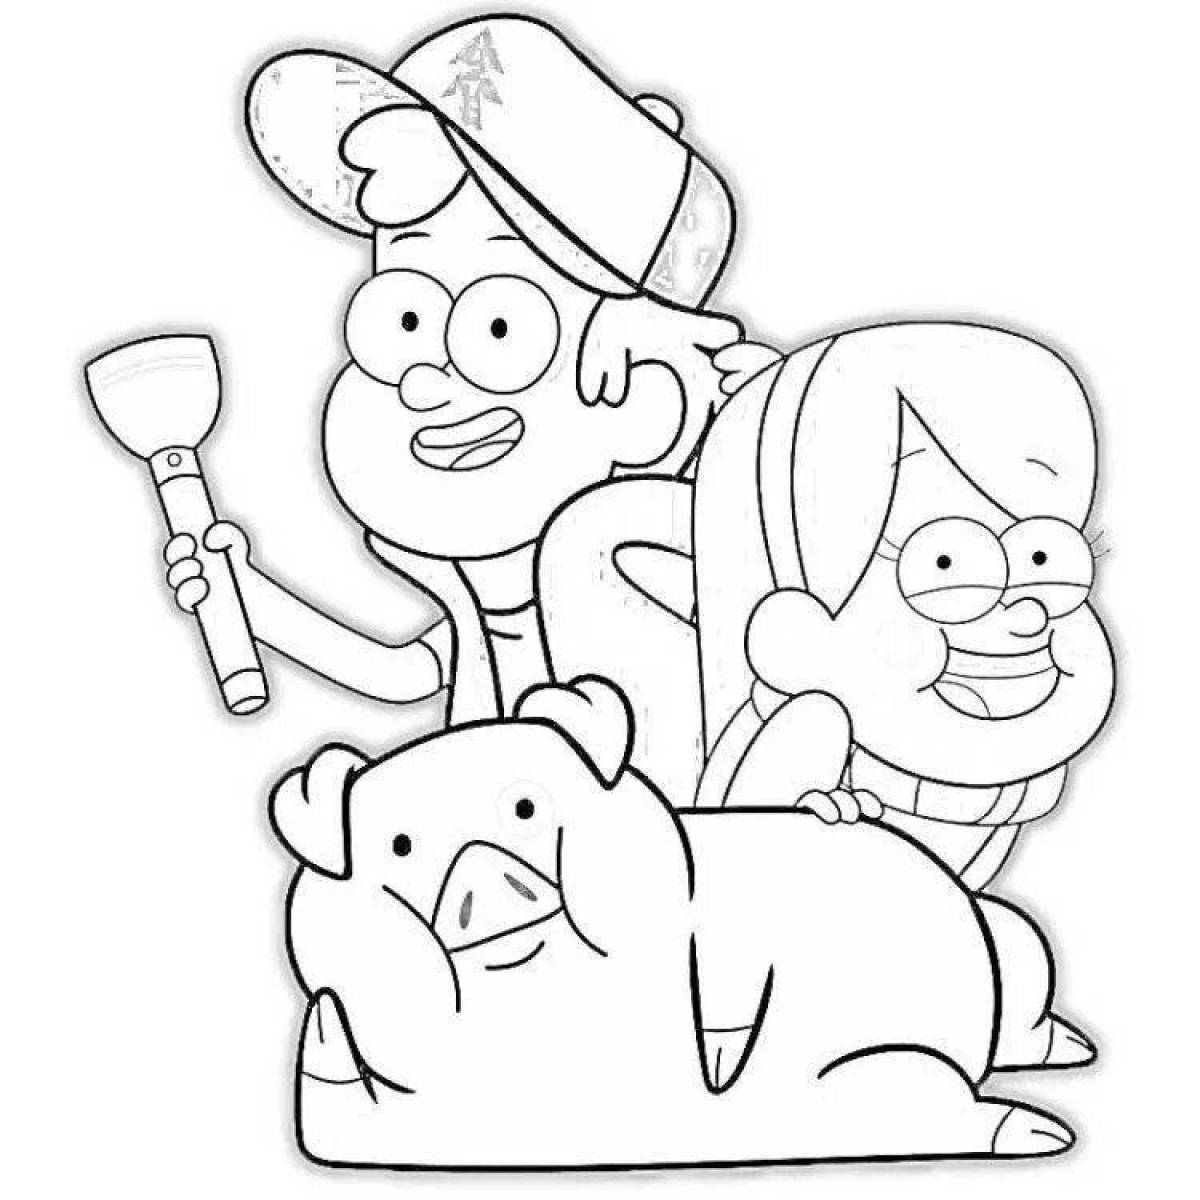 Sunny Mabel and Dipper coloring page